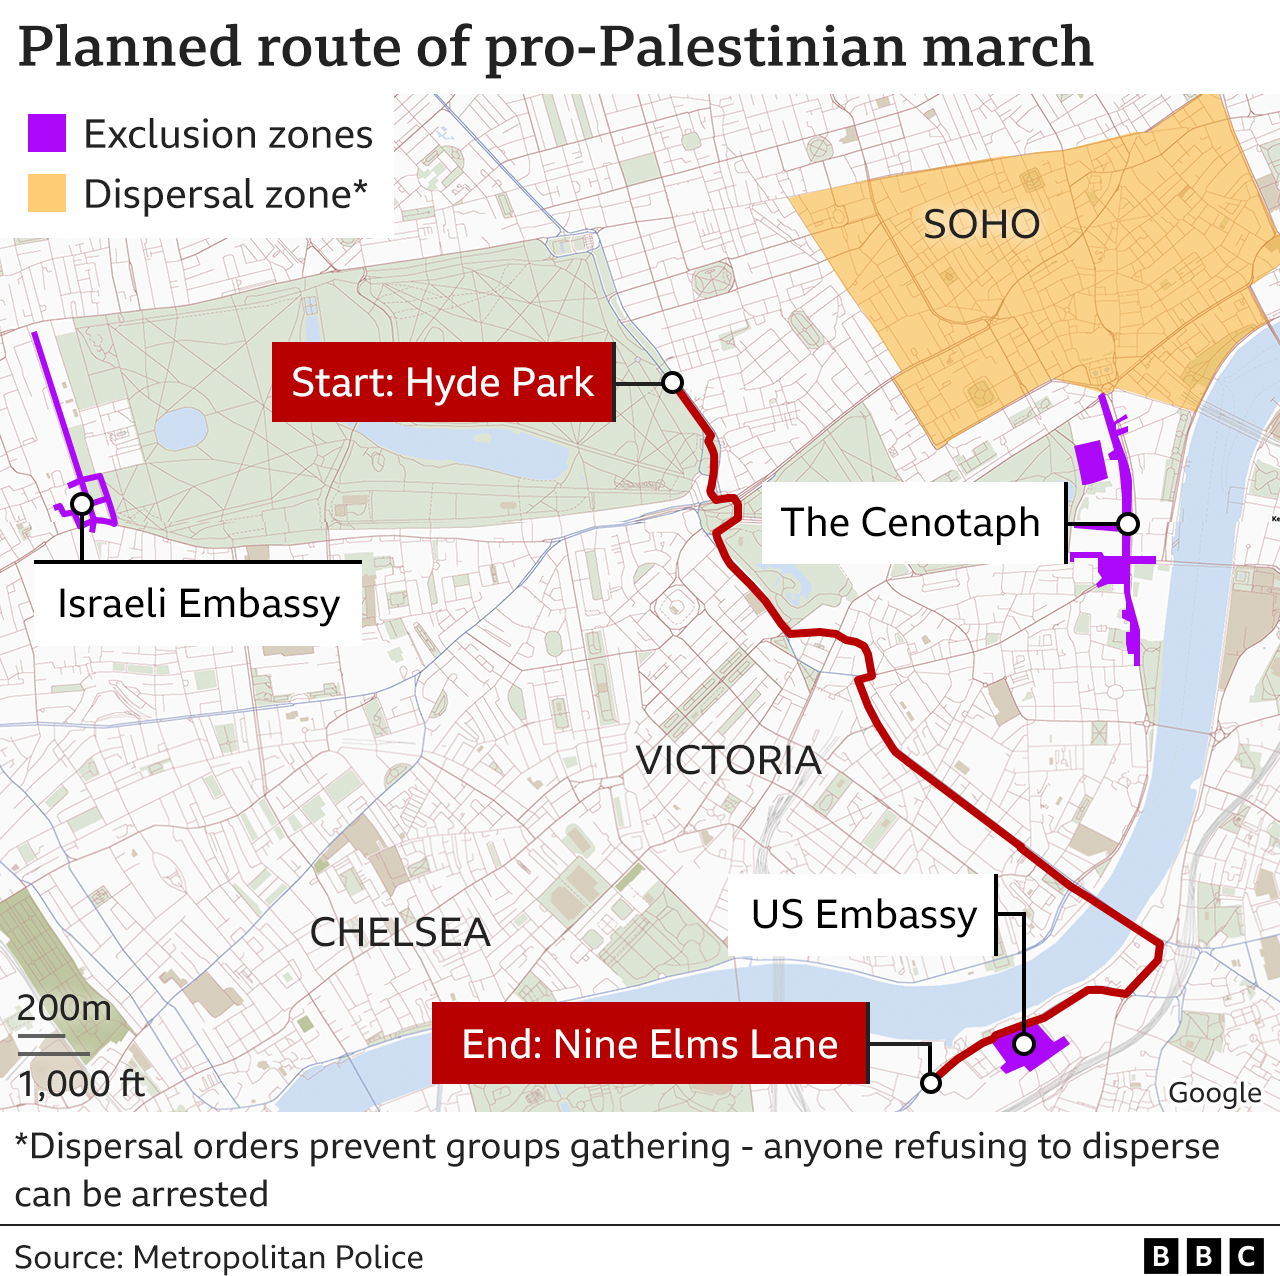 Planned route of march